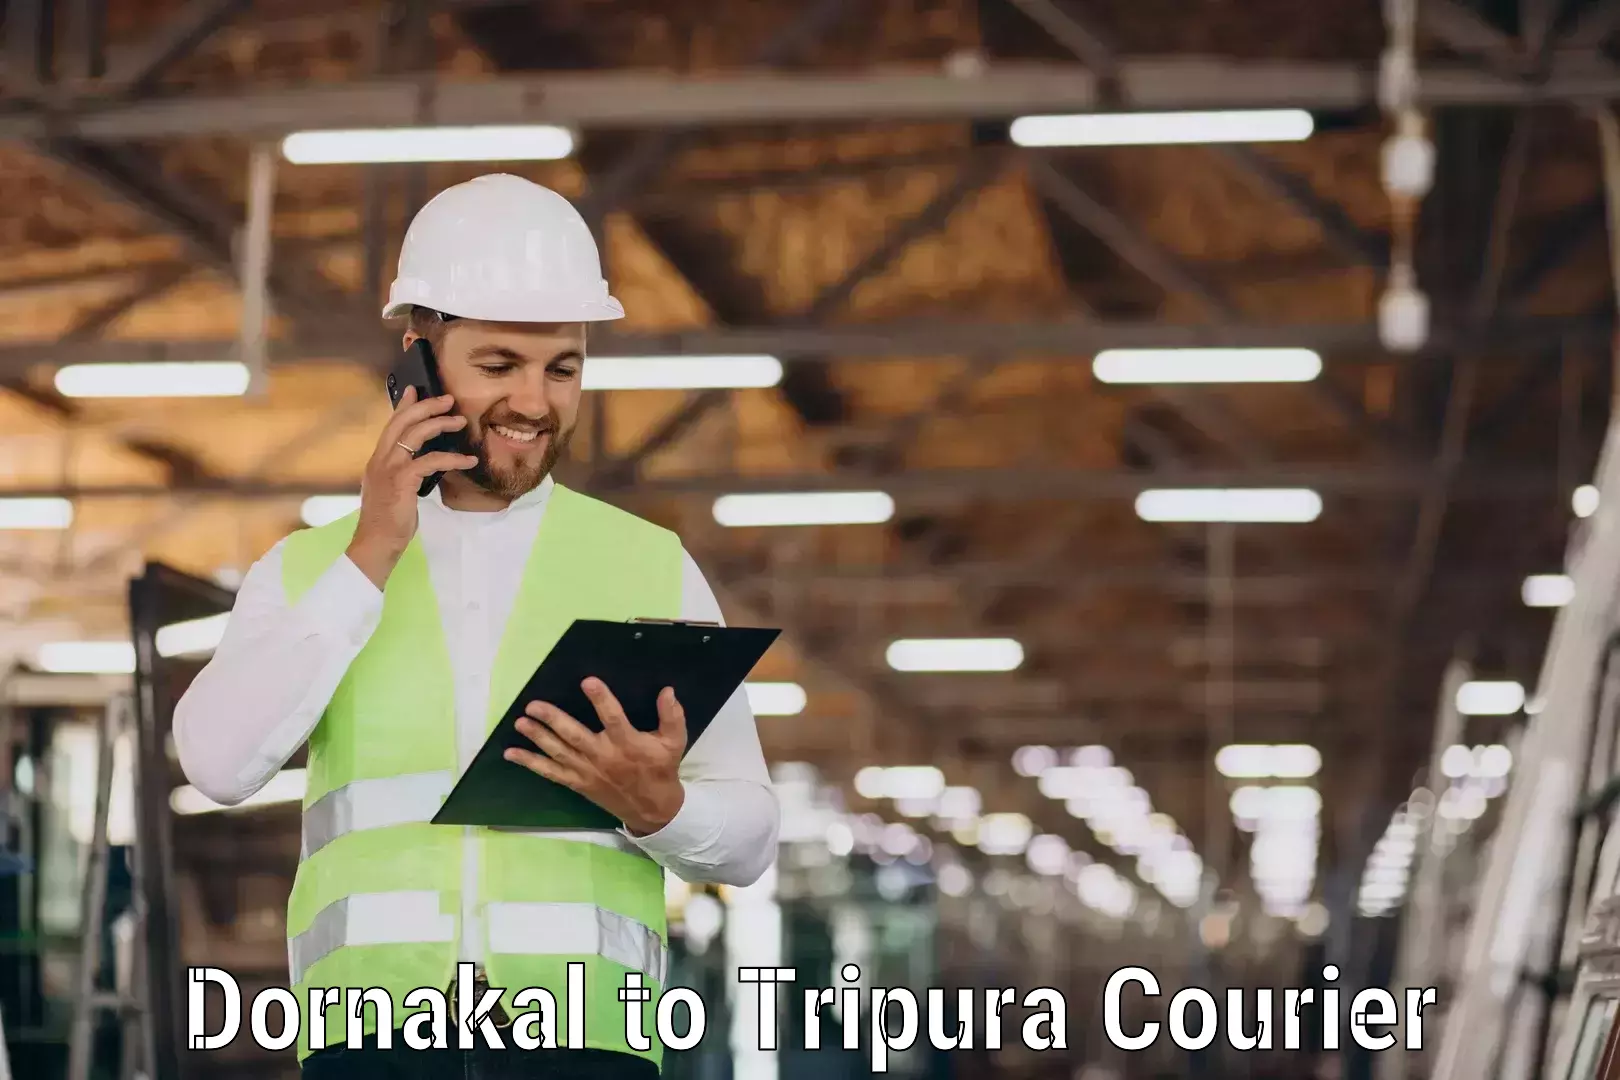 State-of-the-art courier technology in Dornakal to Udaipur Tripura